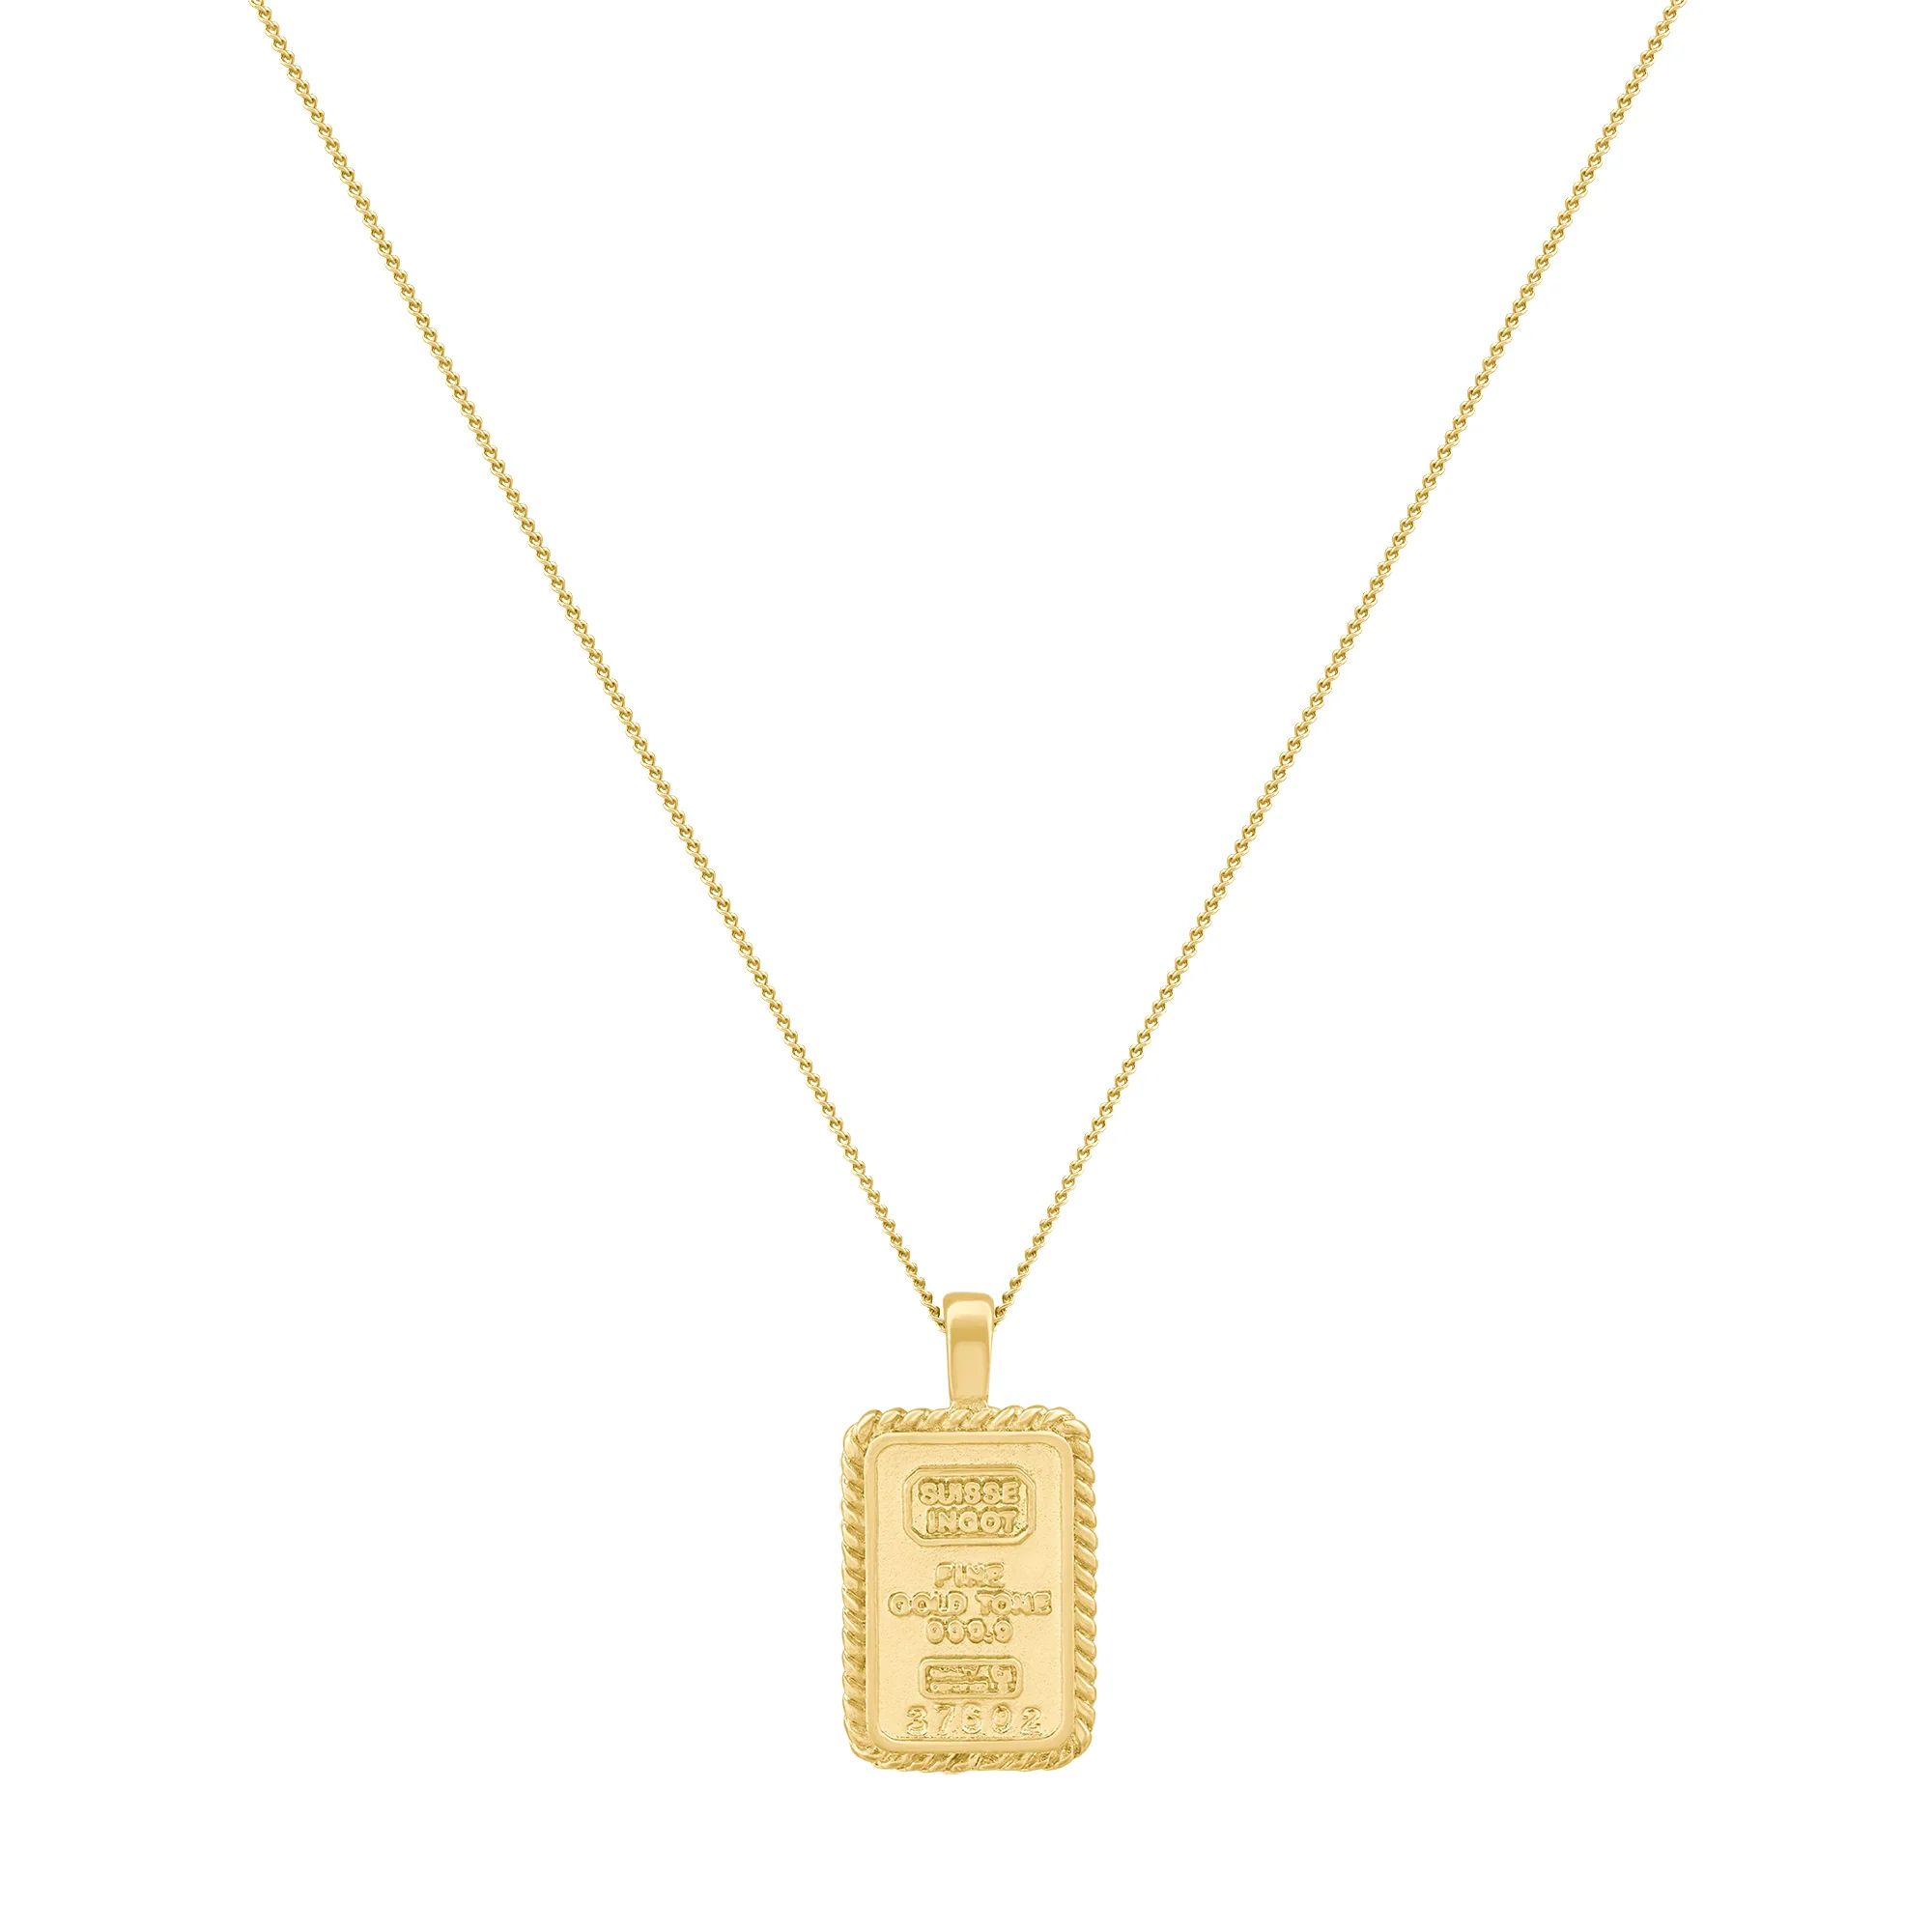 Gold Digger Necklace | Electric Picks Jewelry